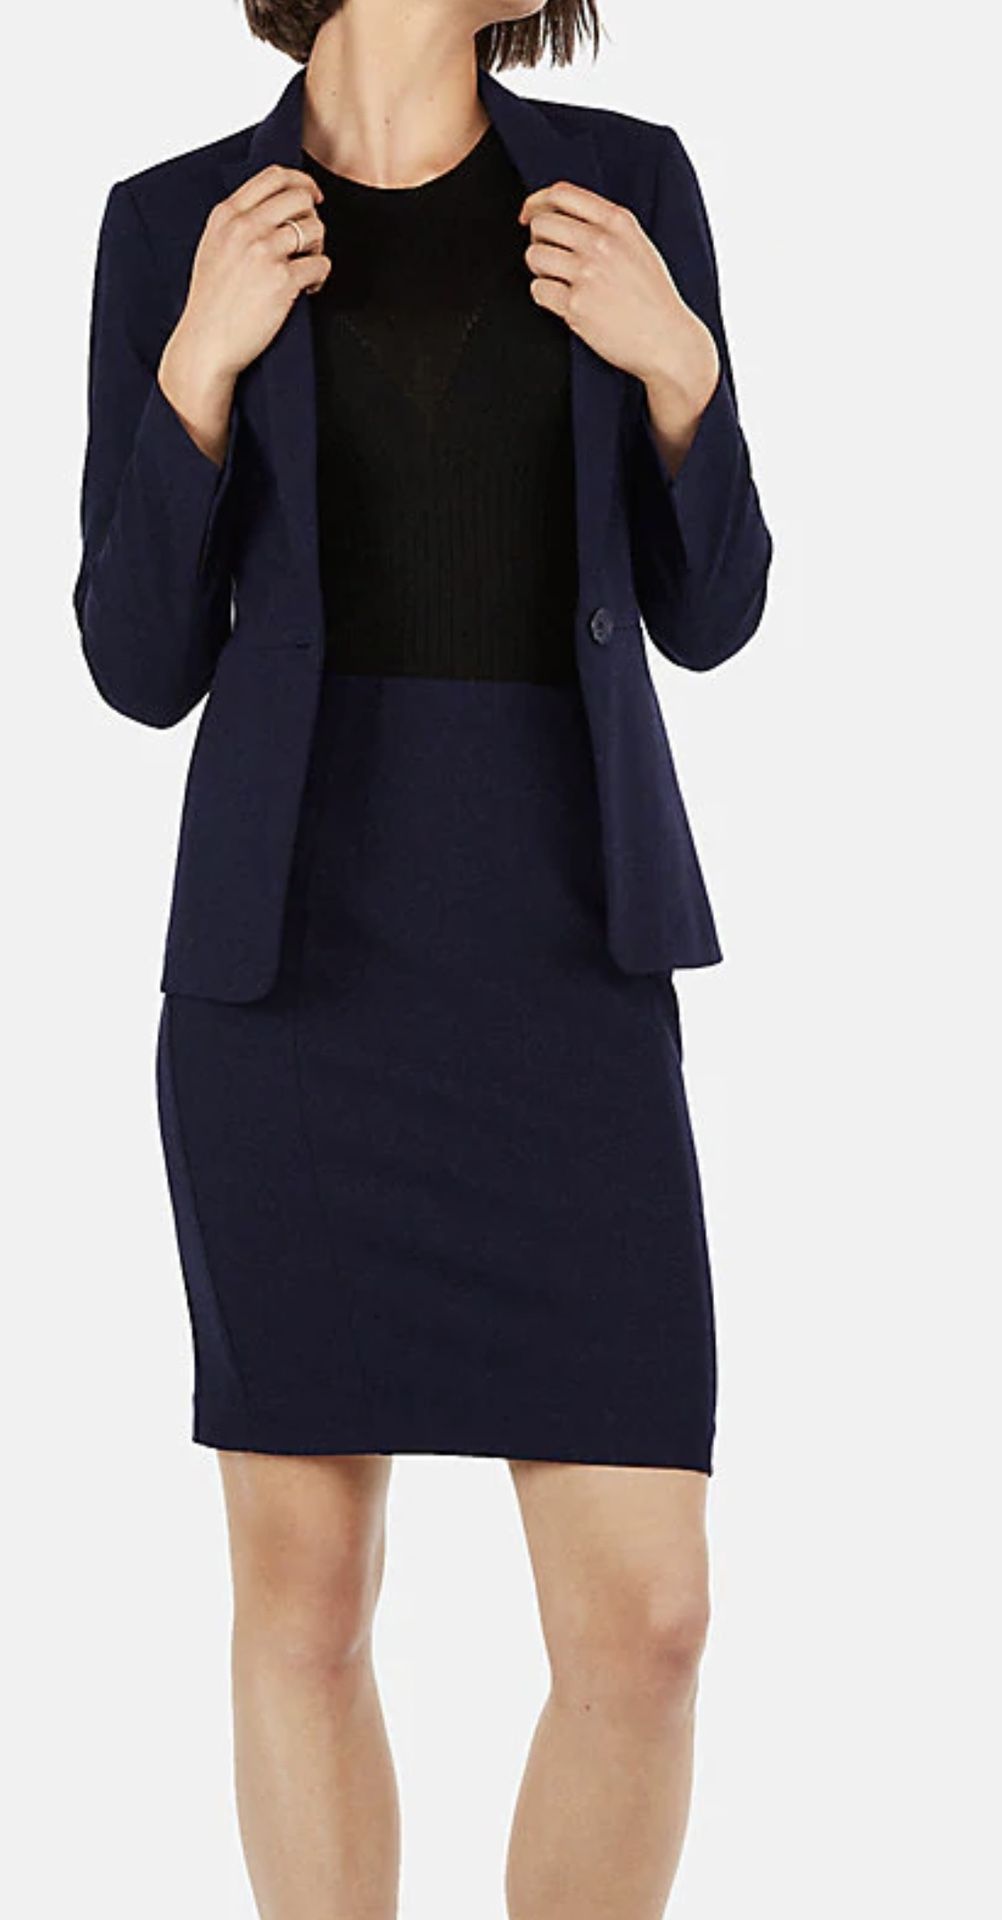 Express Women’s Navy Blue Two Piece Suit